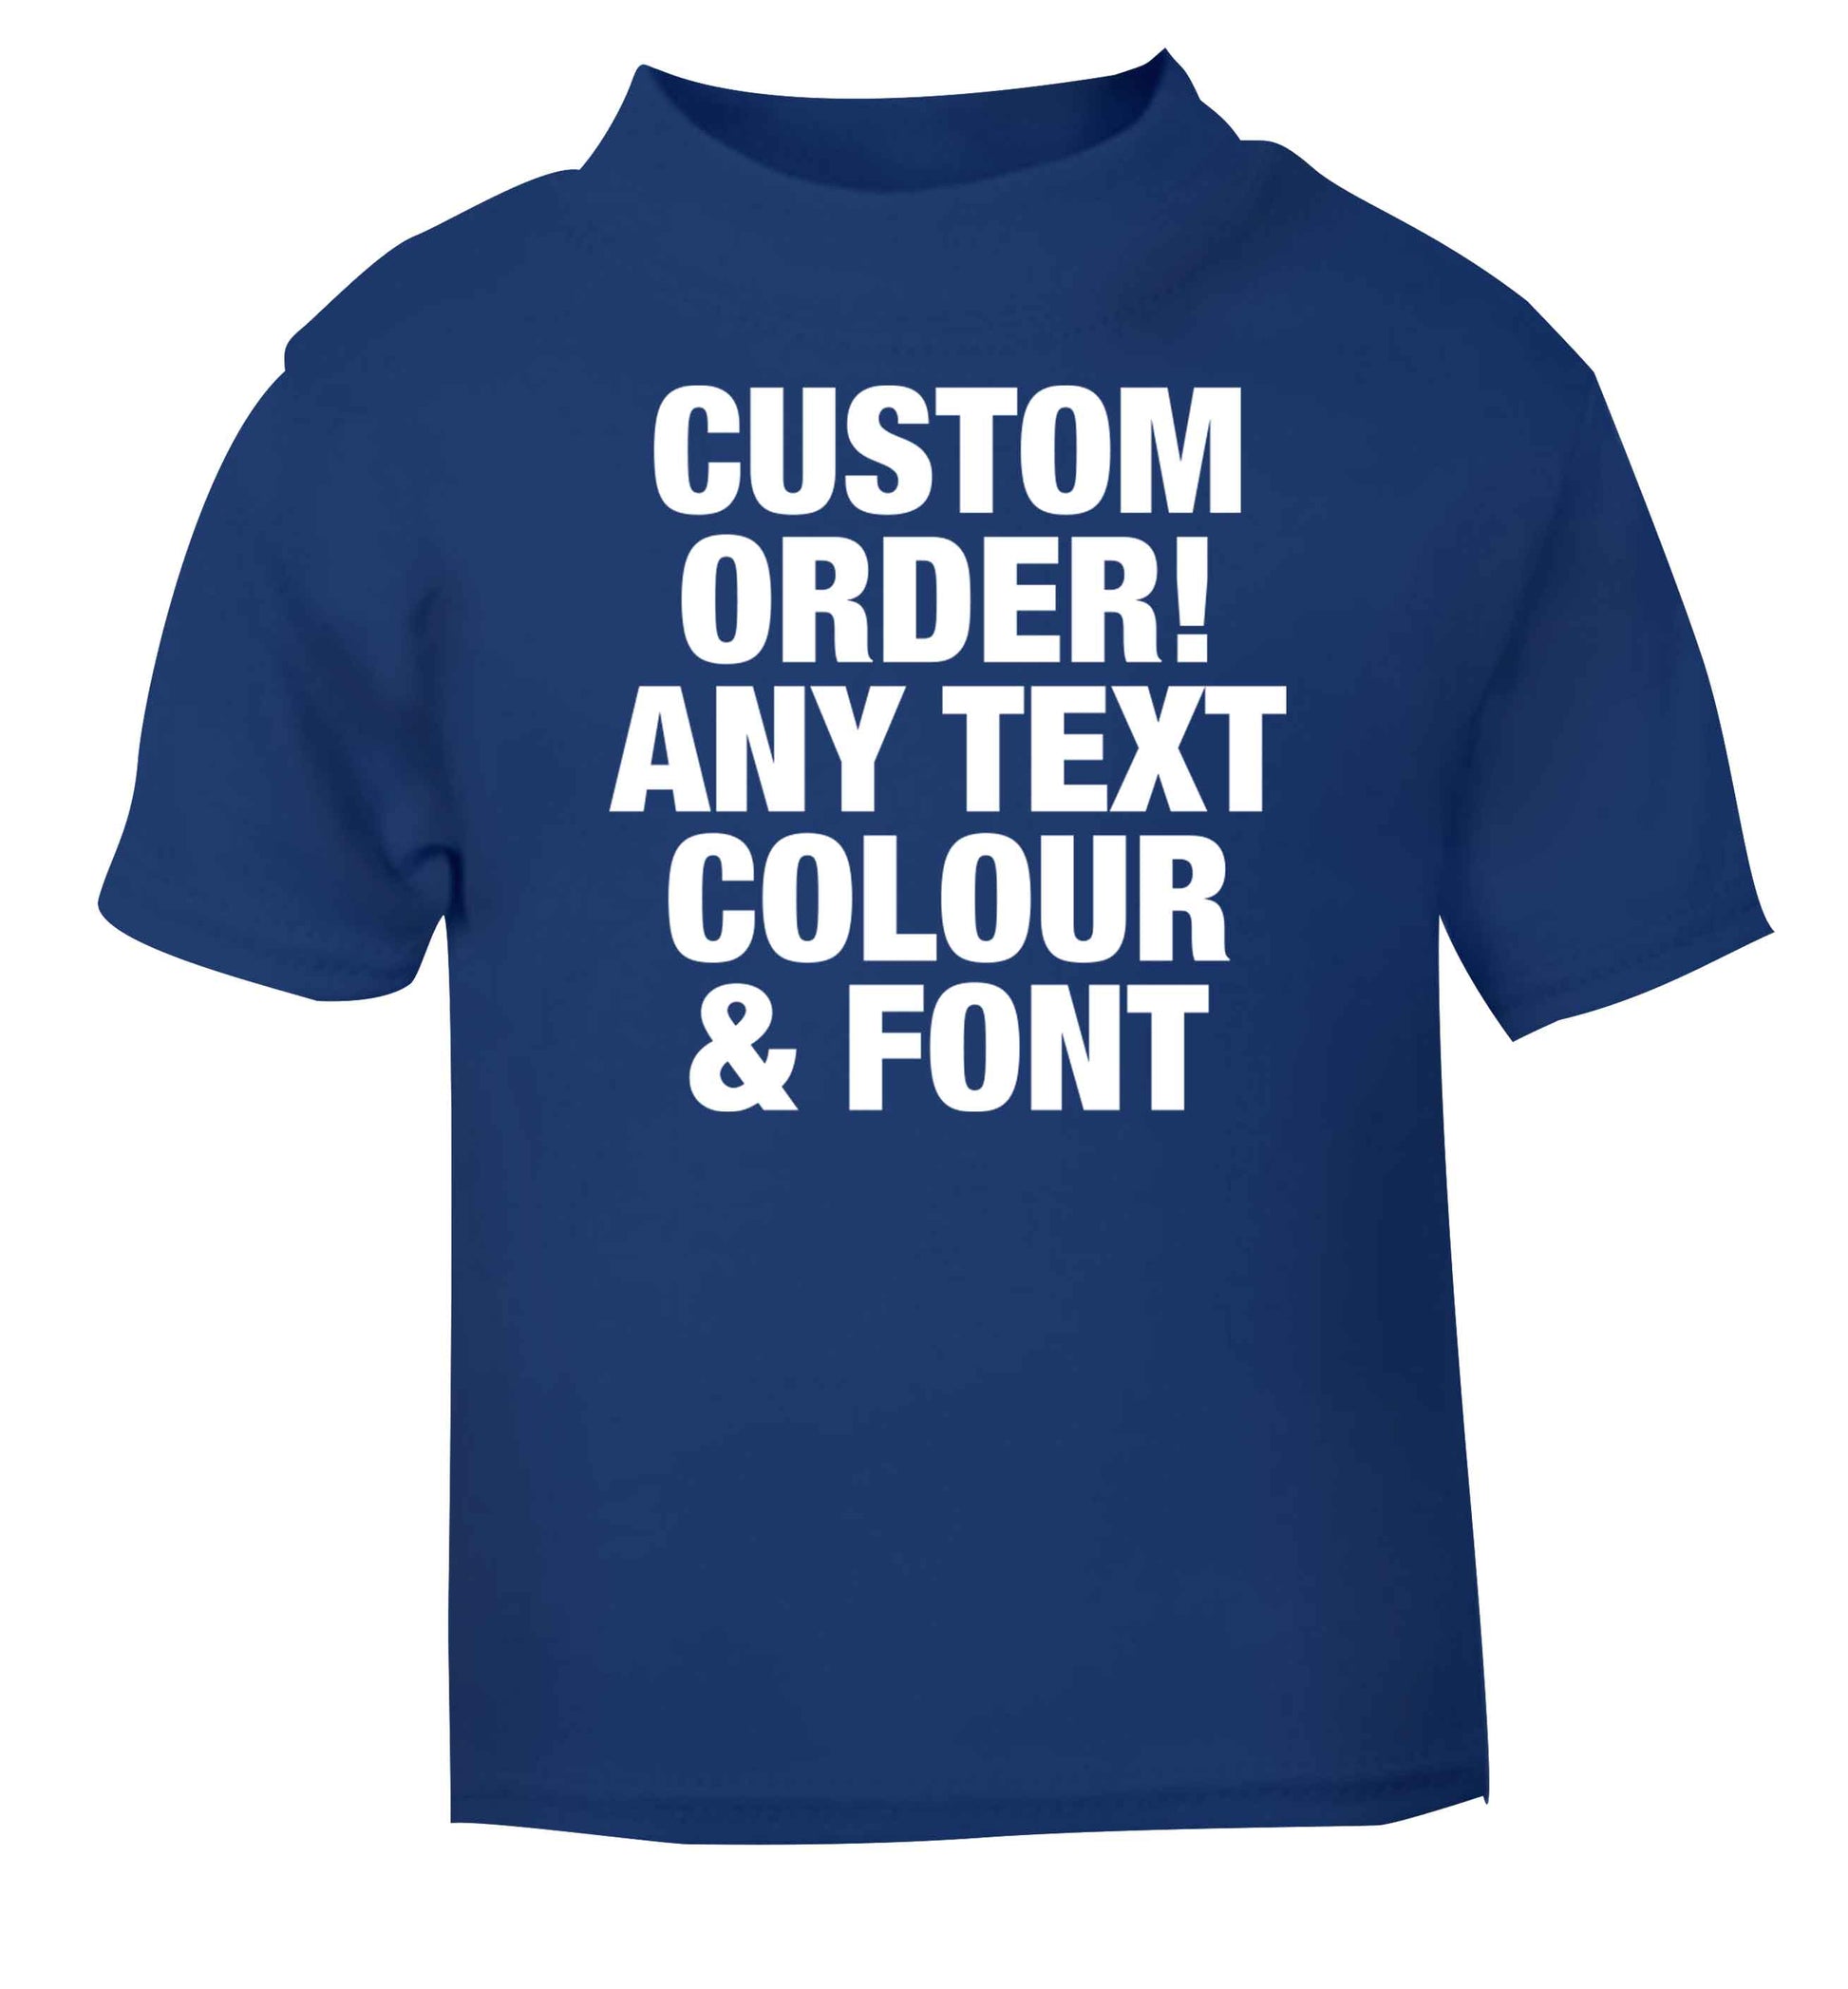 Custom order any text colour and font blue baby toddler Tshirt 2 Years